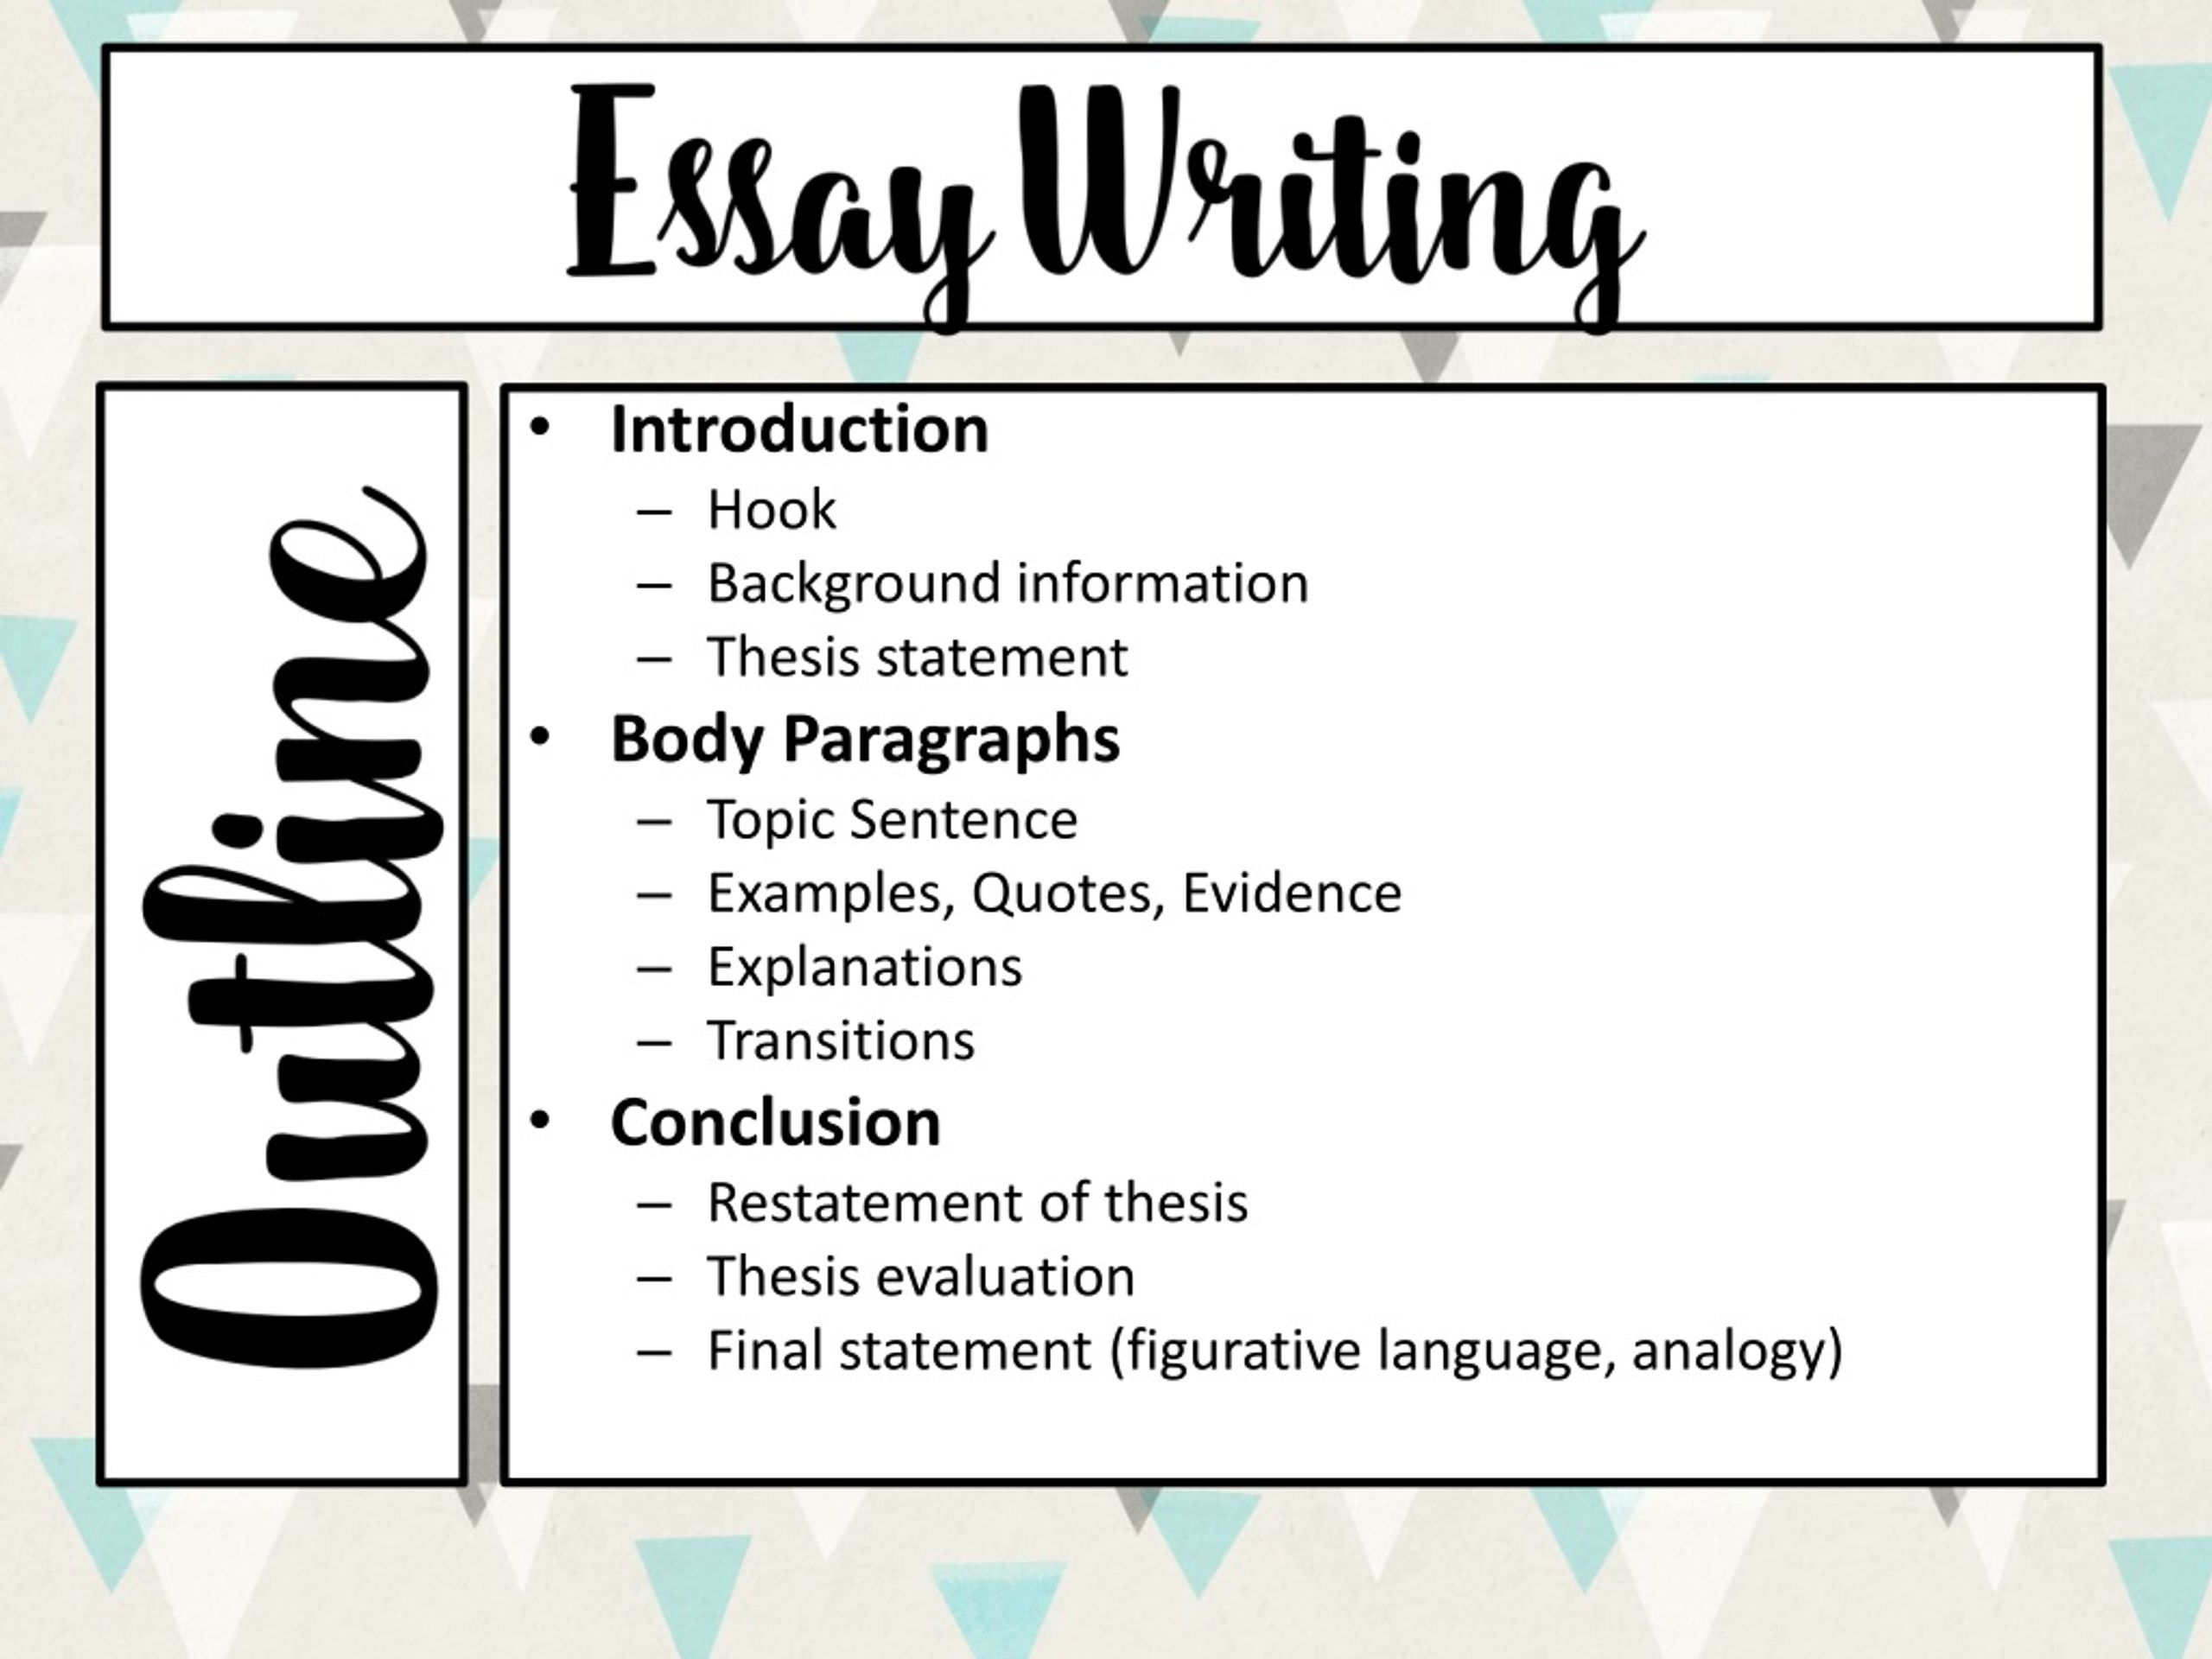 PPT - Informative essay - nonfiction writing that provides